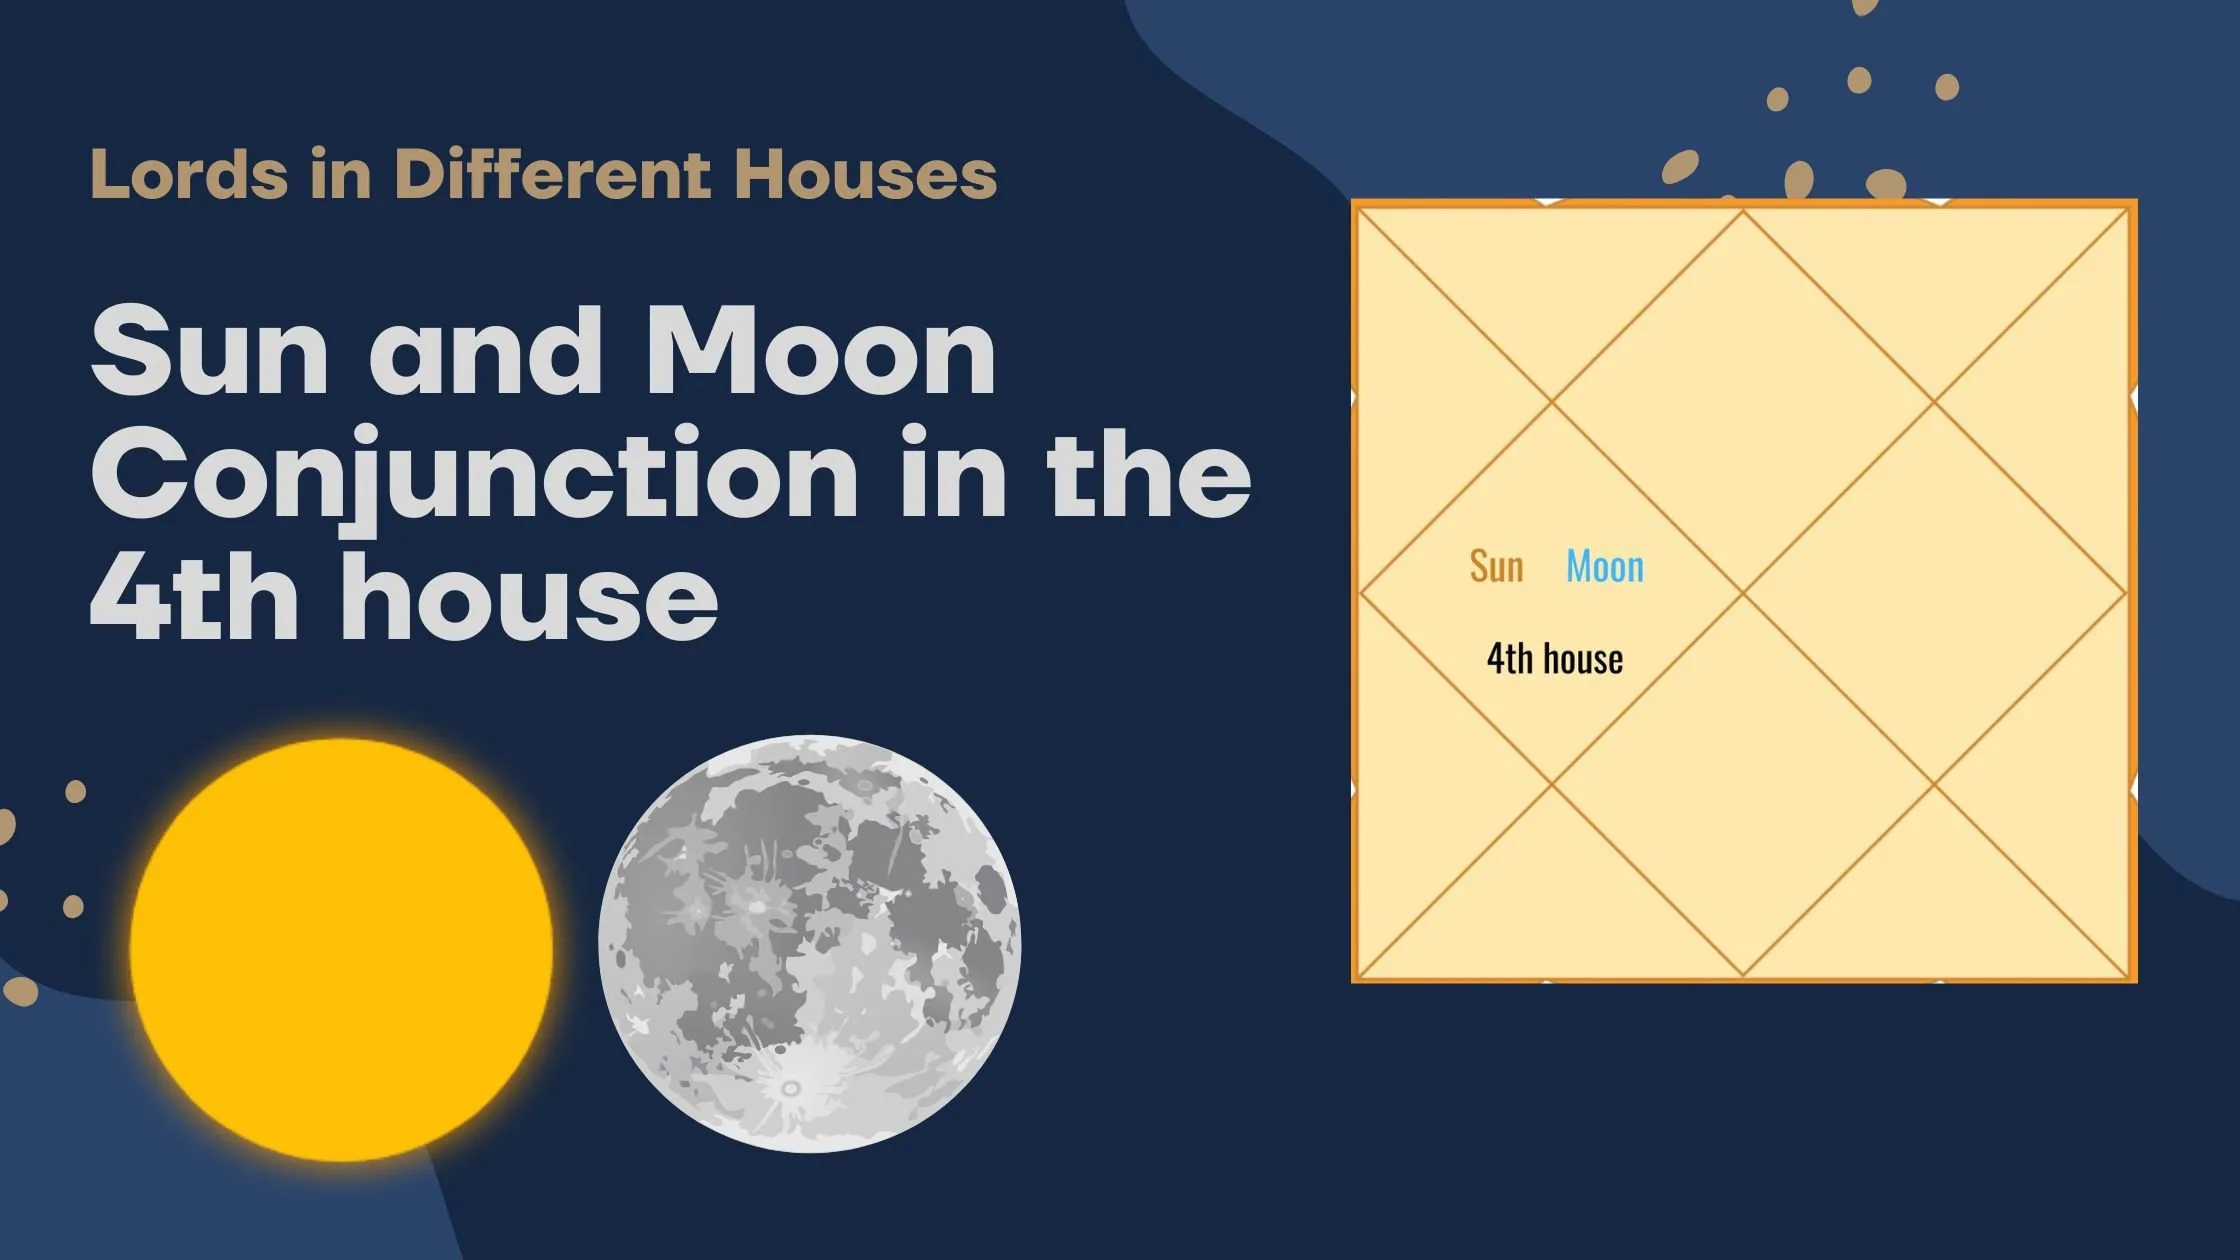 Sun and Moon Conjunction in 4th house